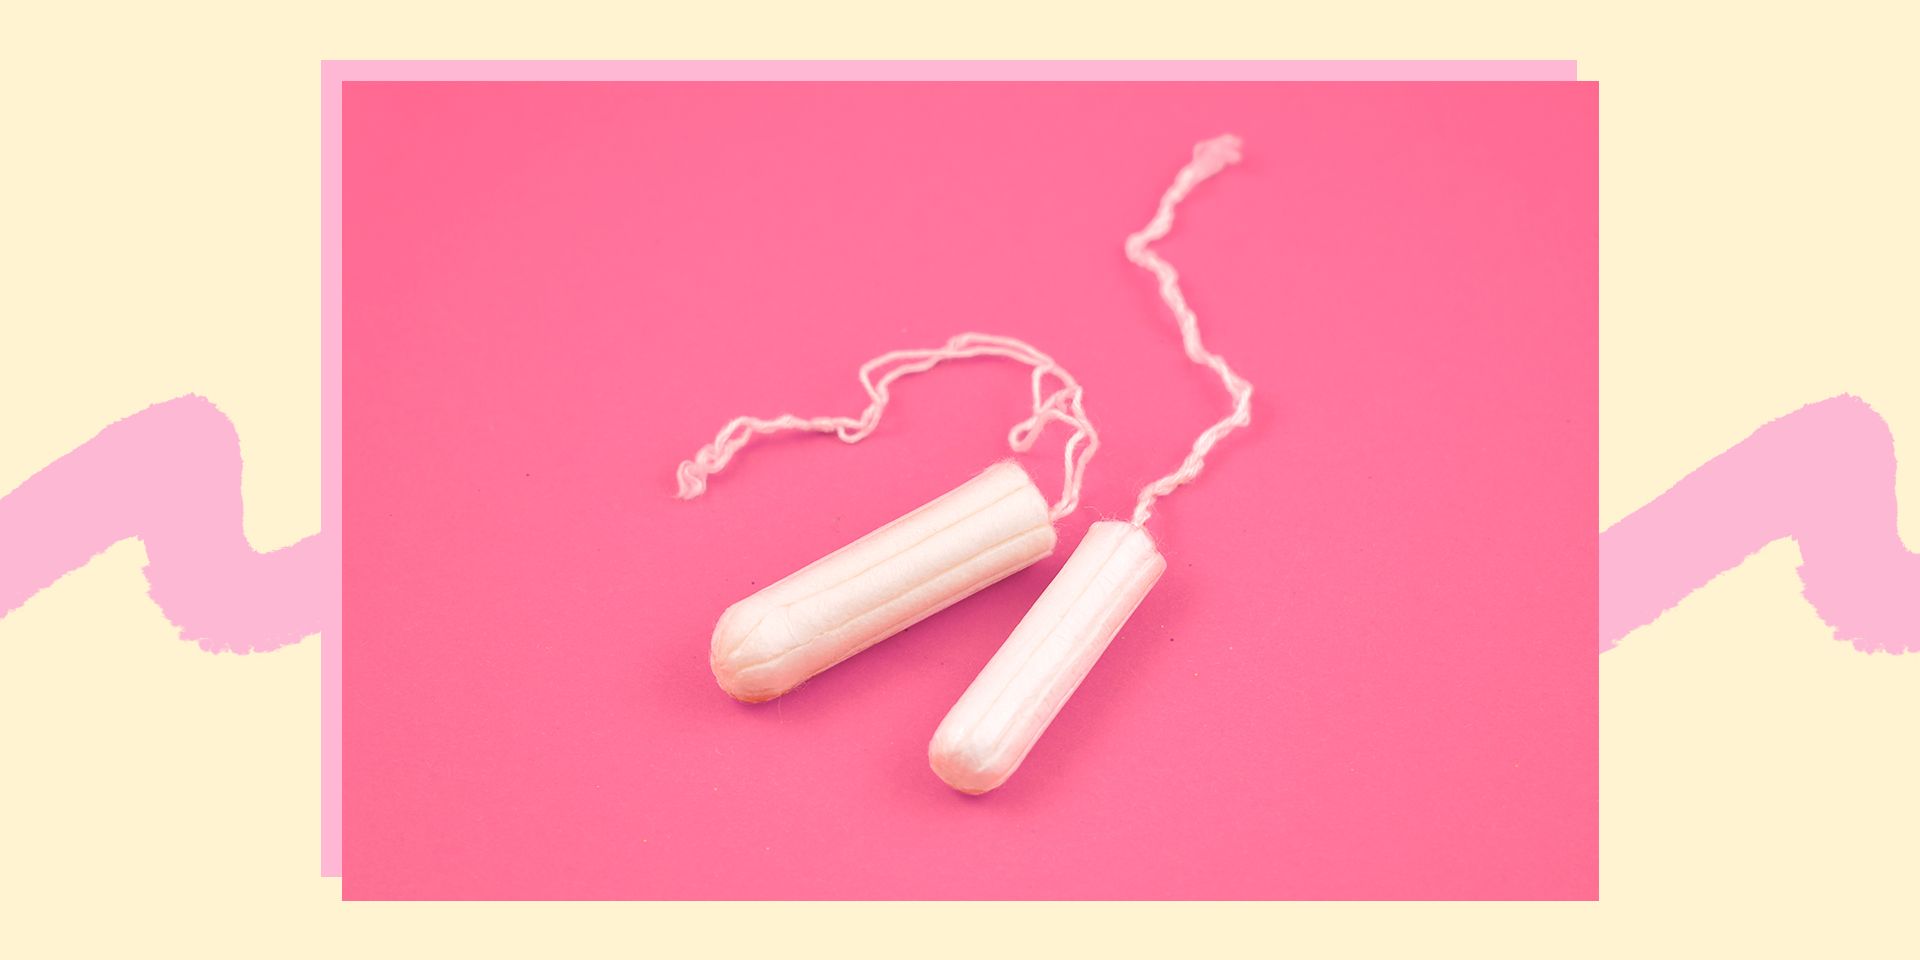 Susteen rygte væv What Happens If You Have 2 Tampons In At The Same Time?